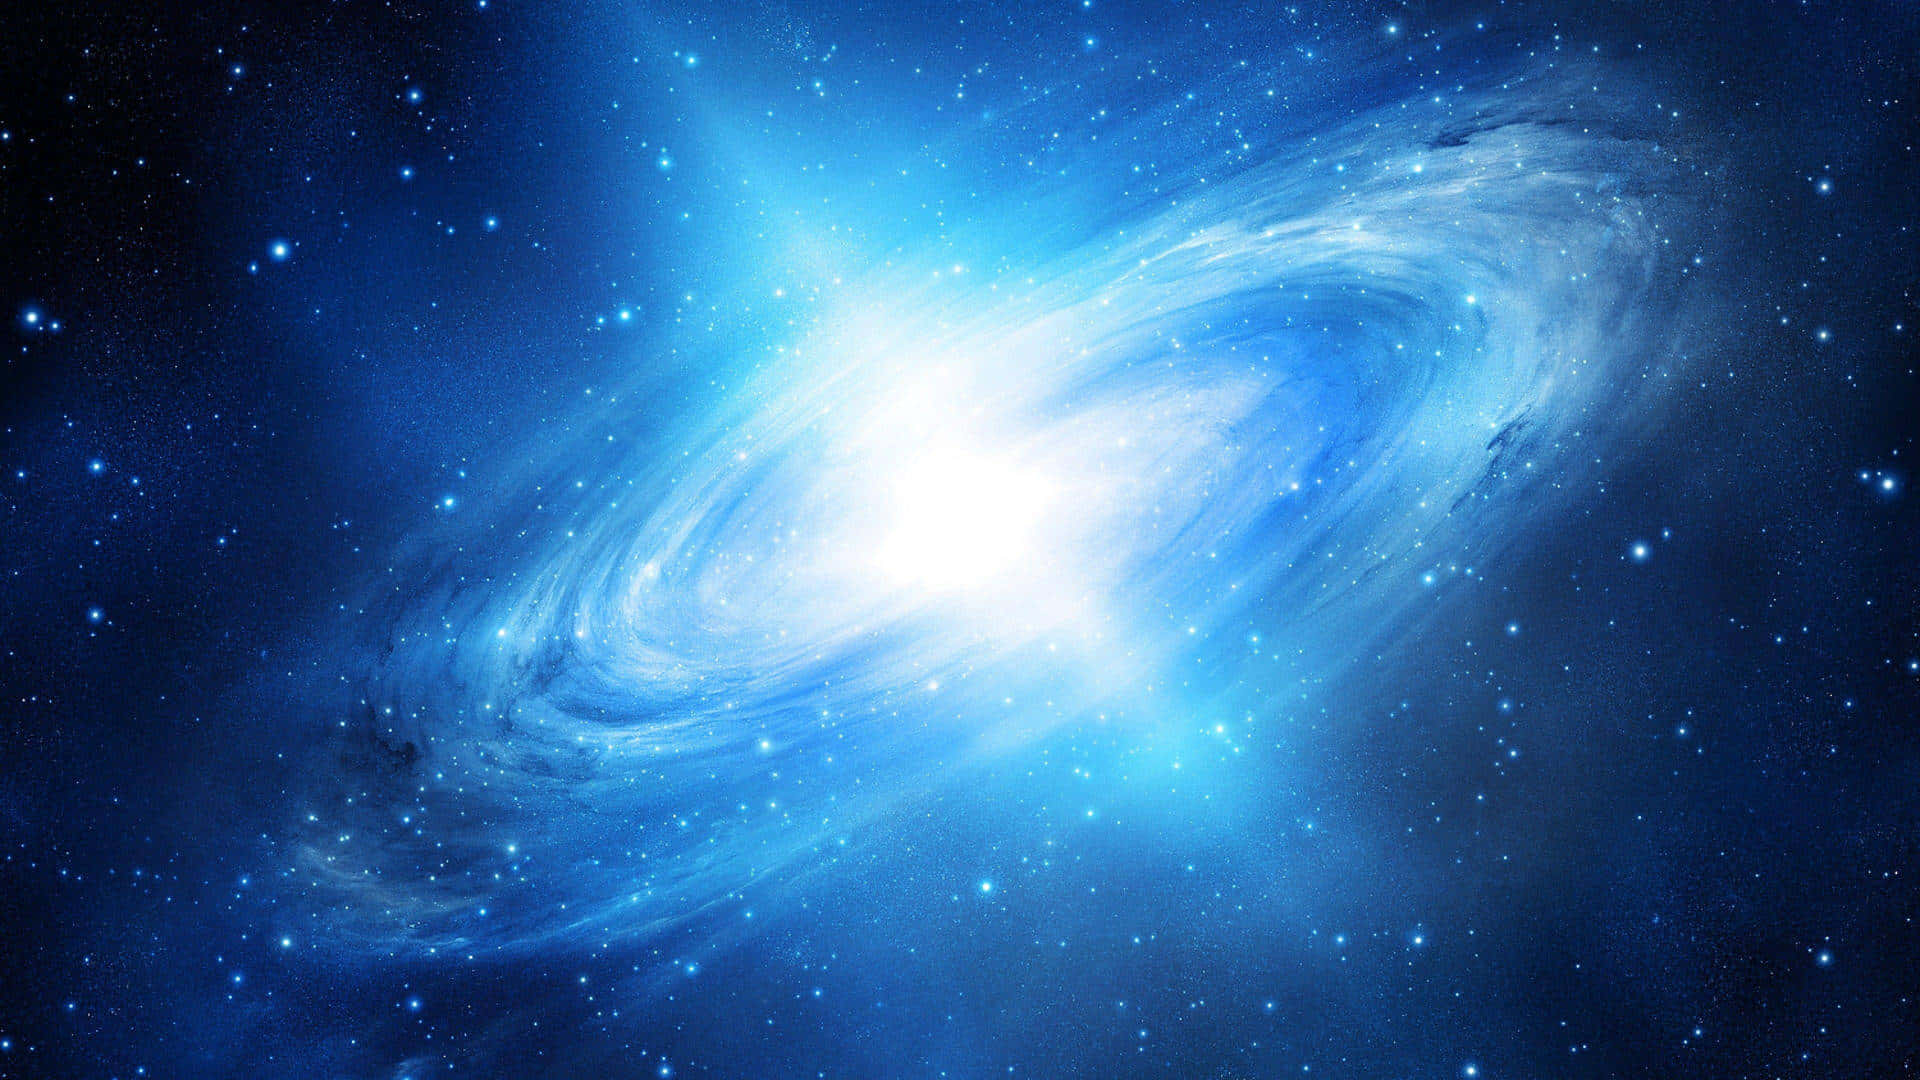 Exploring the depths of a breathtaking Blue Galaxy